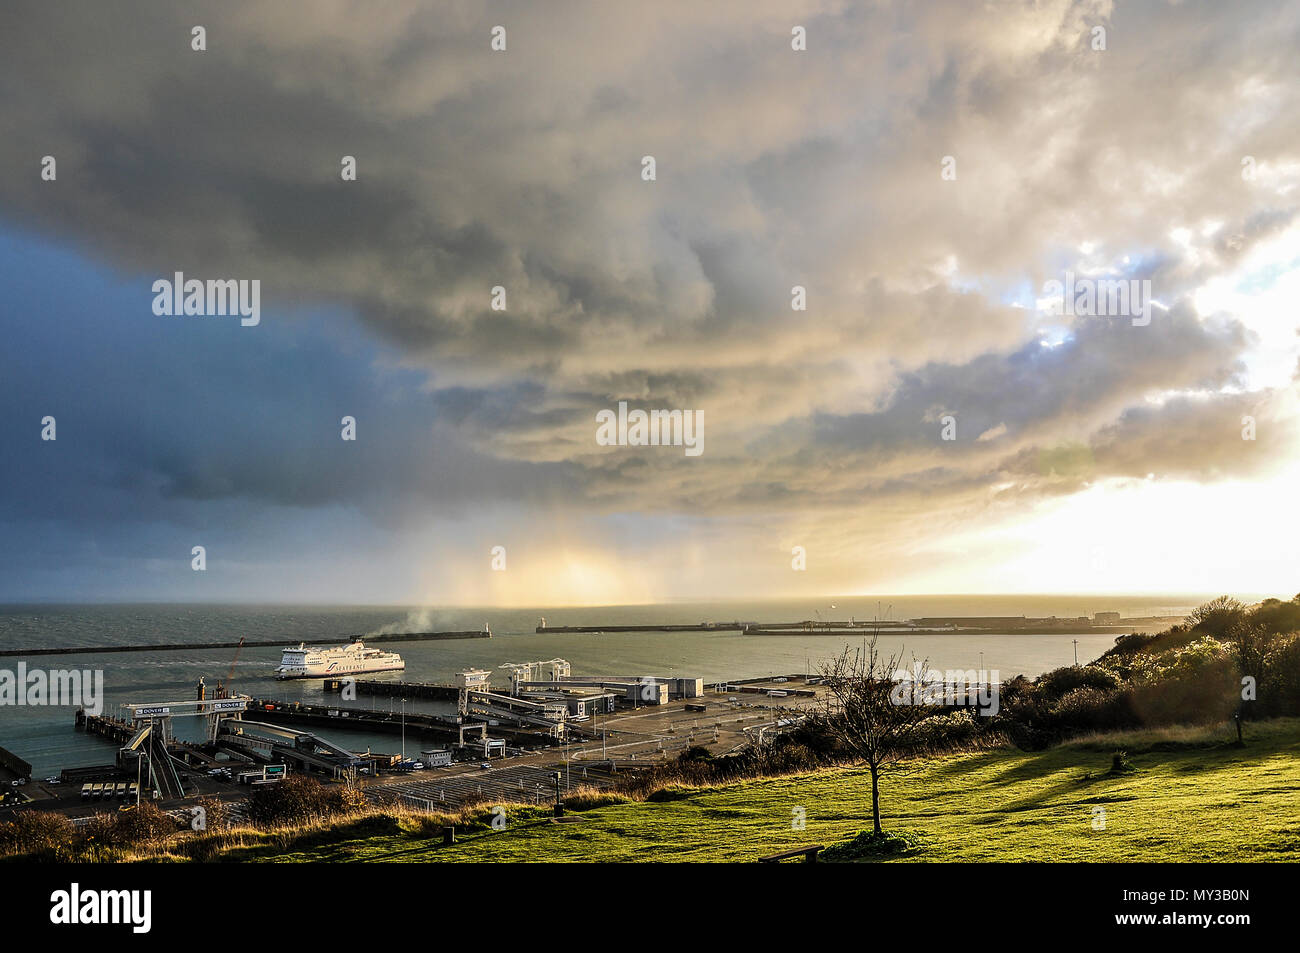 Bad weather over the English Channel and Port of Dover. Extreme weather. Storms. Rain. Raining. Dusk. Sunset. Sea France ferry Stock Photo